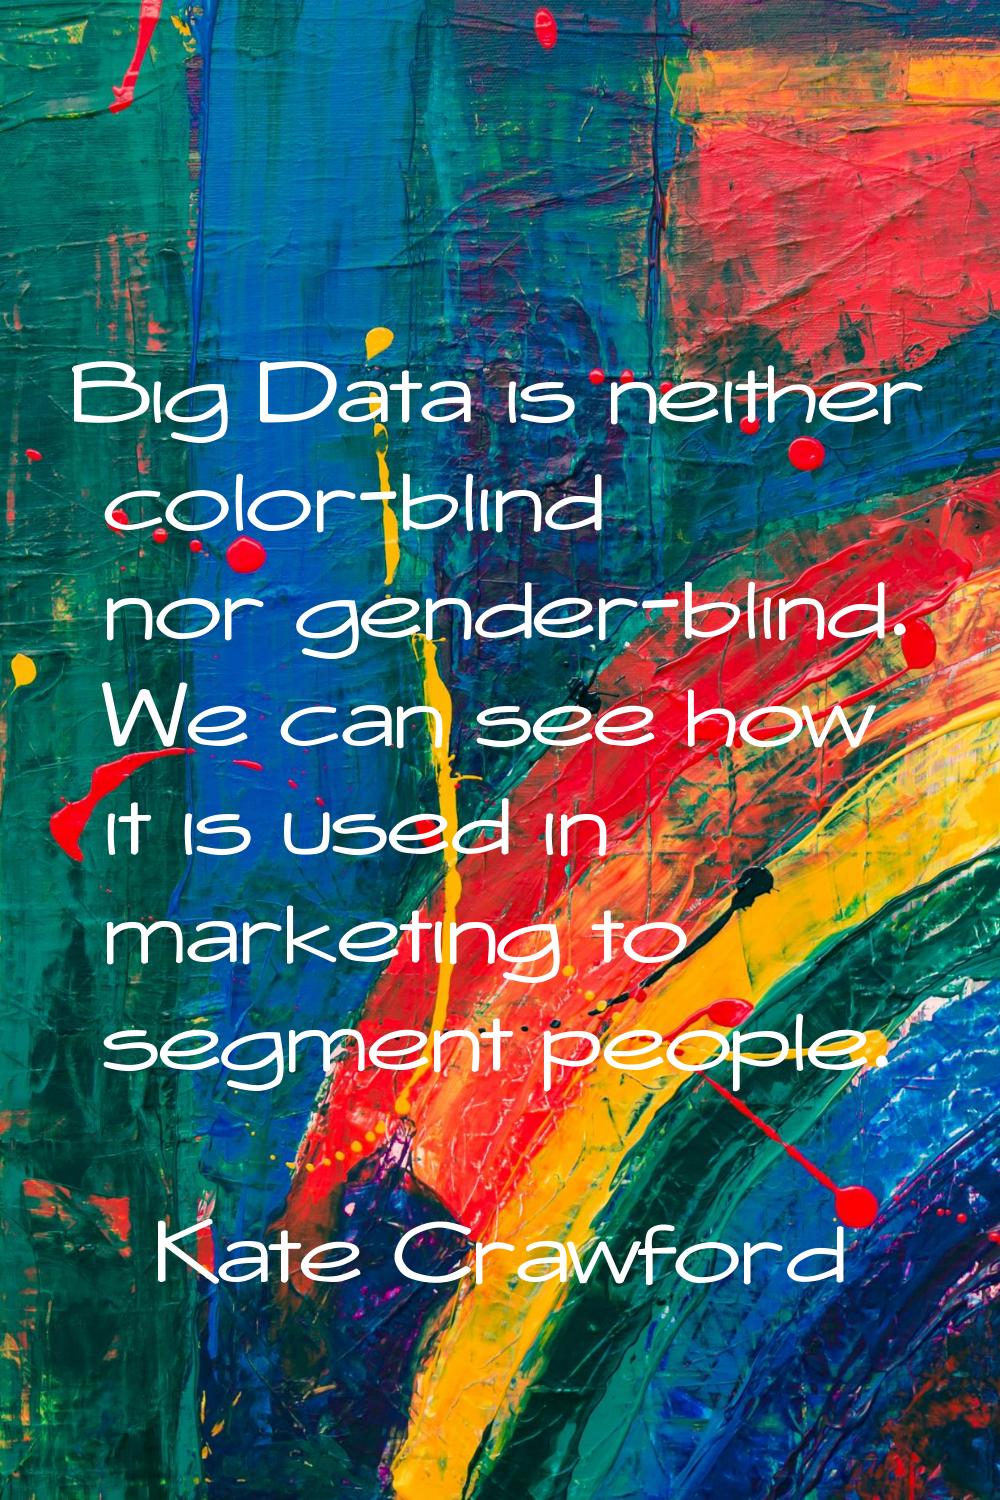 Big Data is neither color-blind nor gender-blind. We can see how it is used in marketing to segment